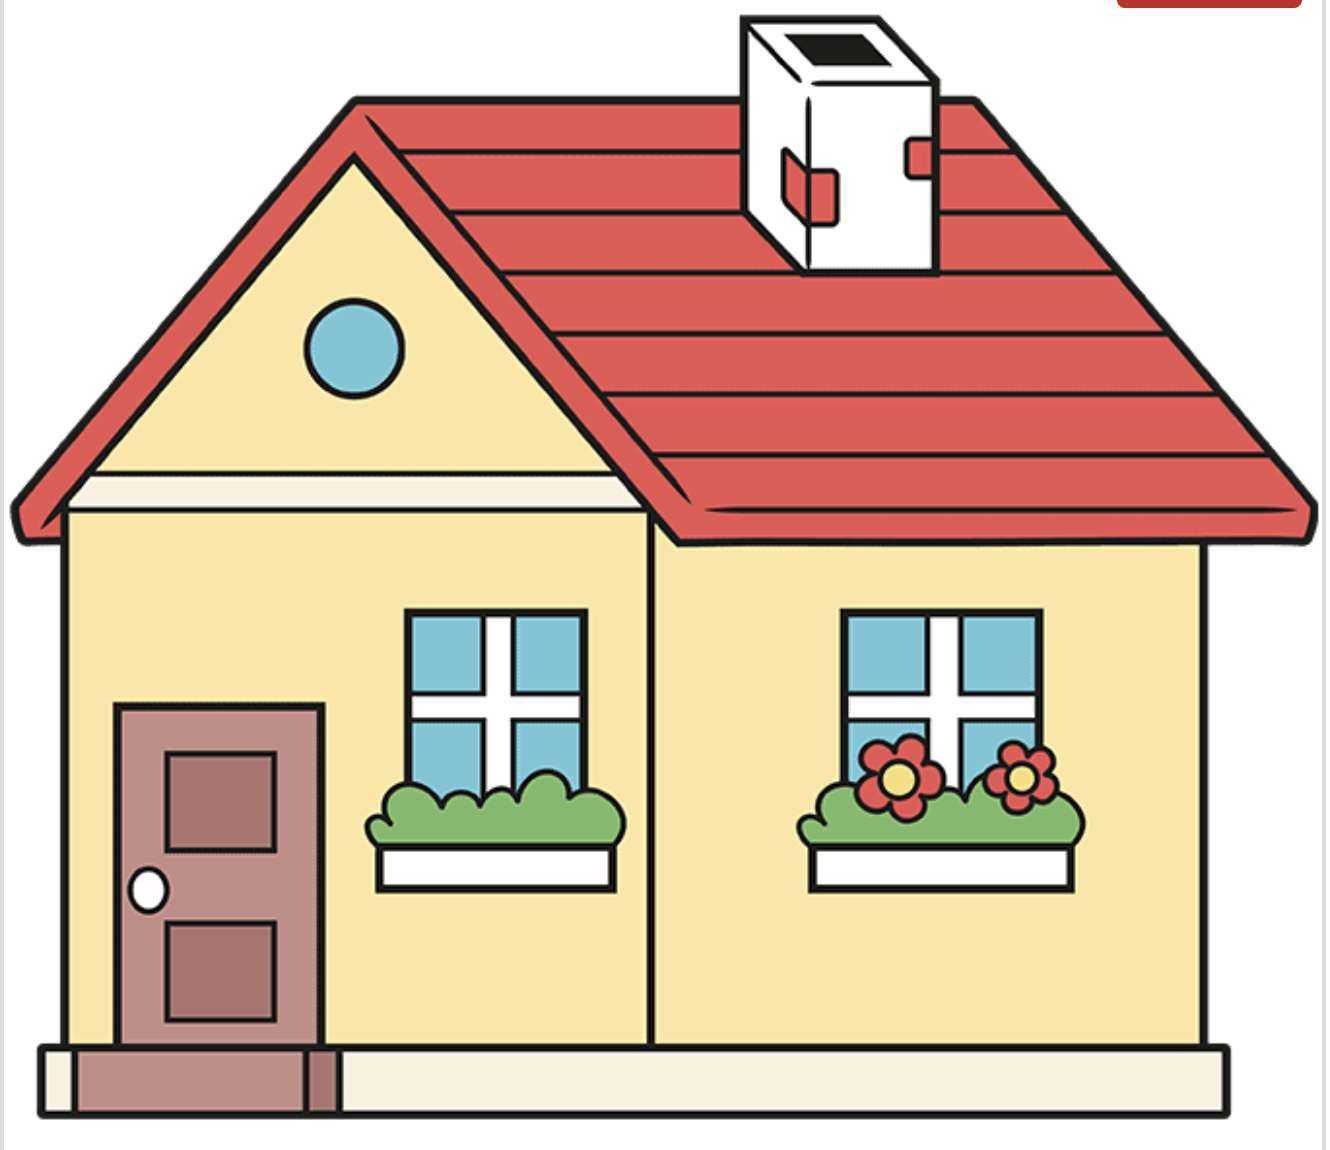 Simple house puzzle online from photo